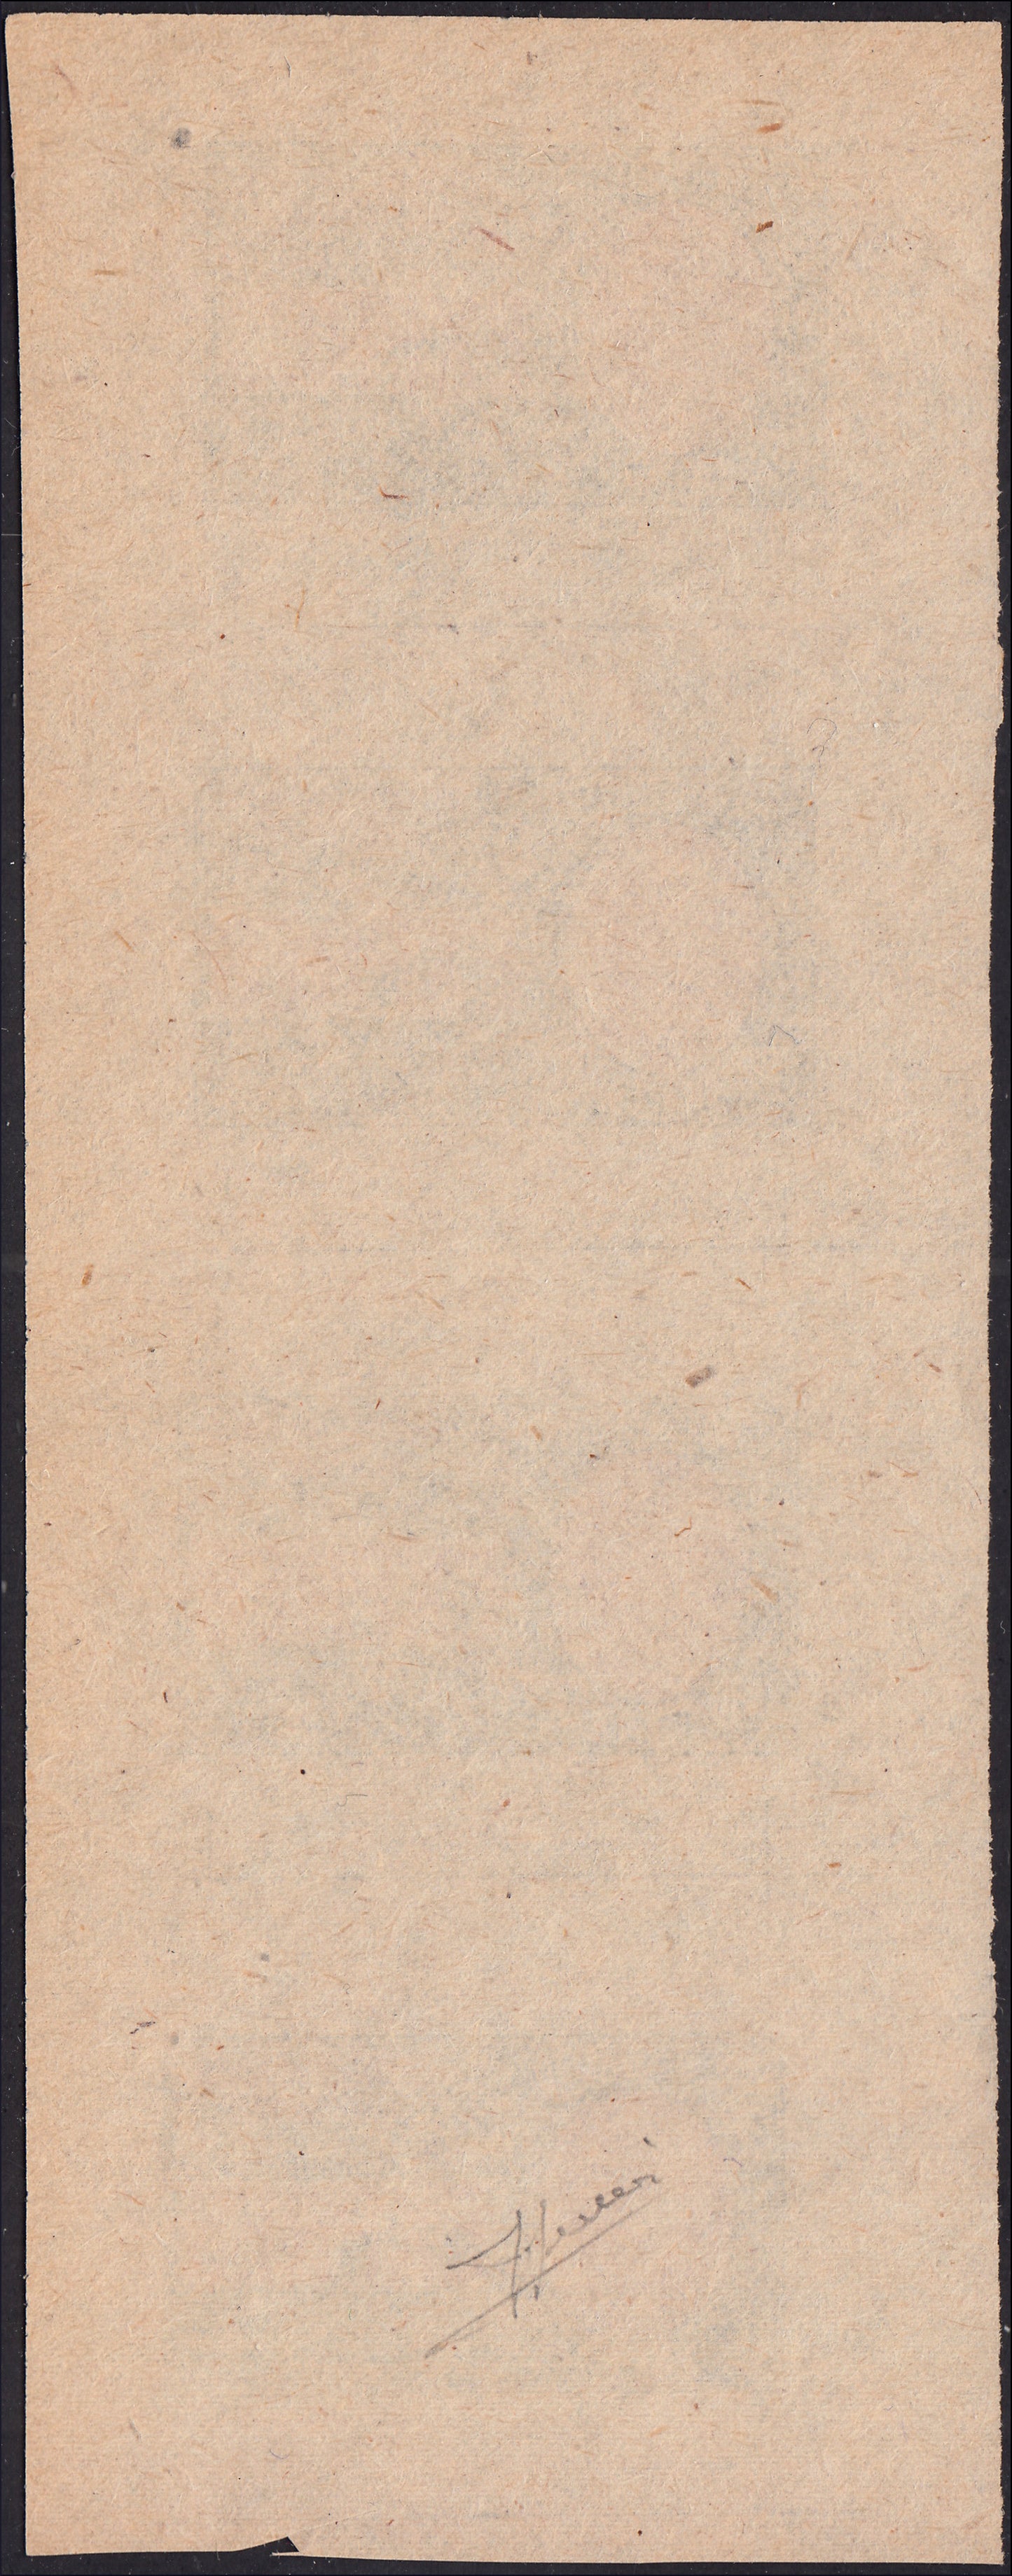 PP1056 - 1922 - L. 1.20 light blue and red, proof sheet on greyish paper and without watermark, (E8, proof).